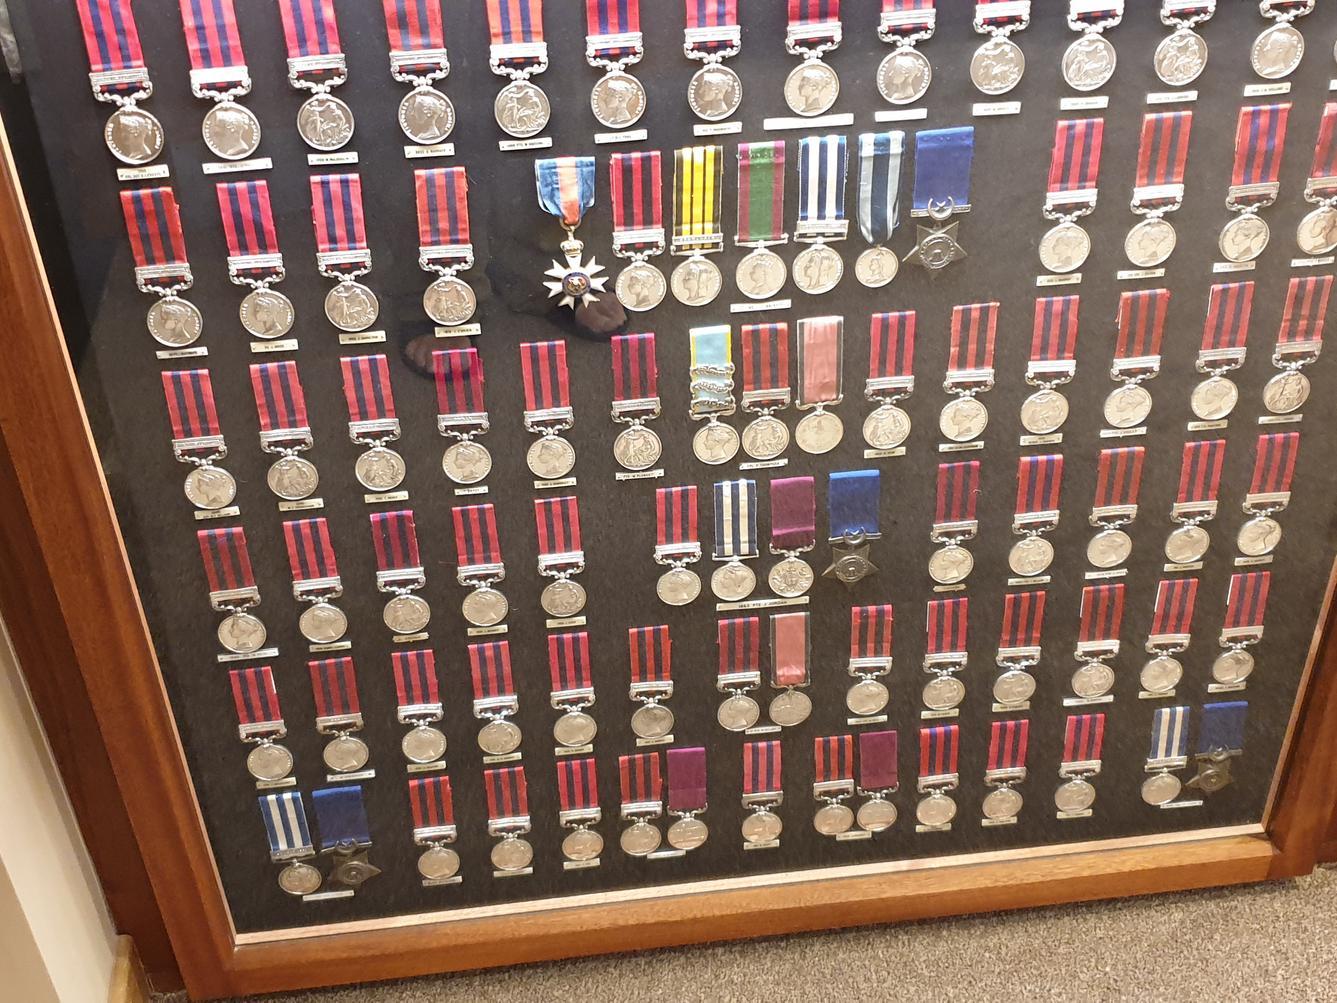 There are hundreds of medals on display